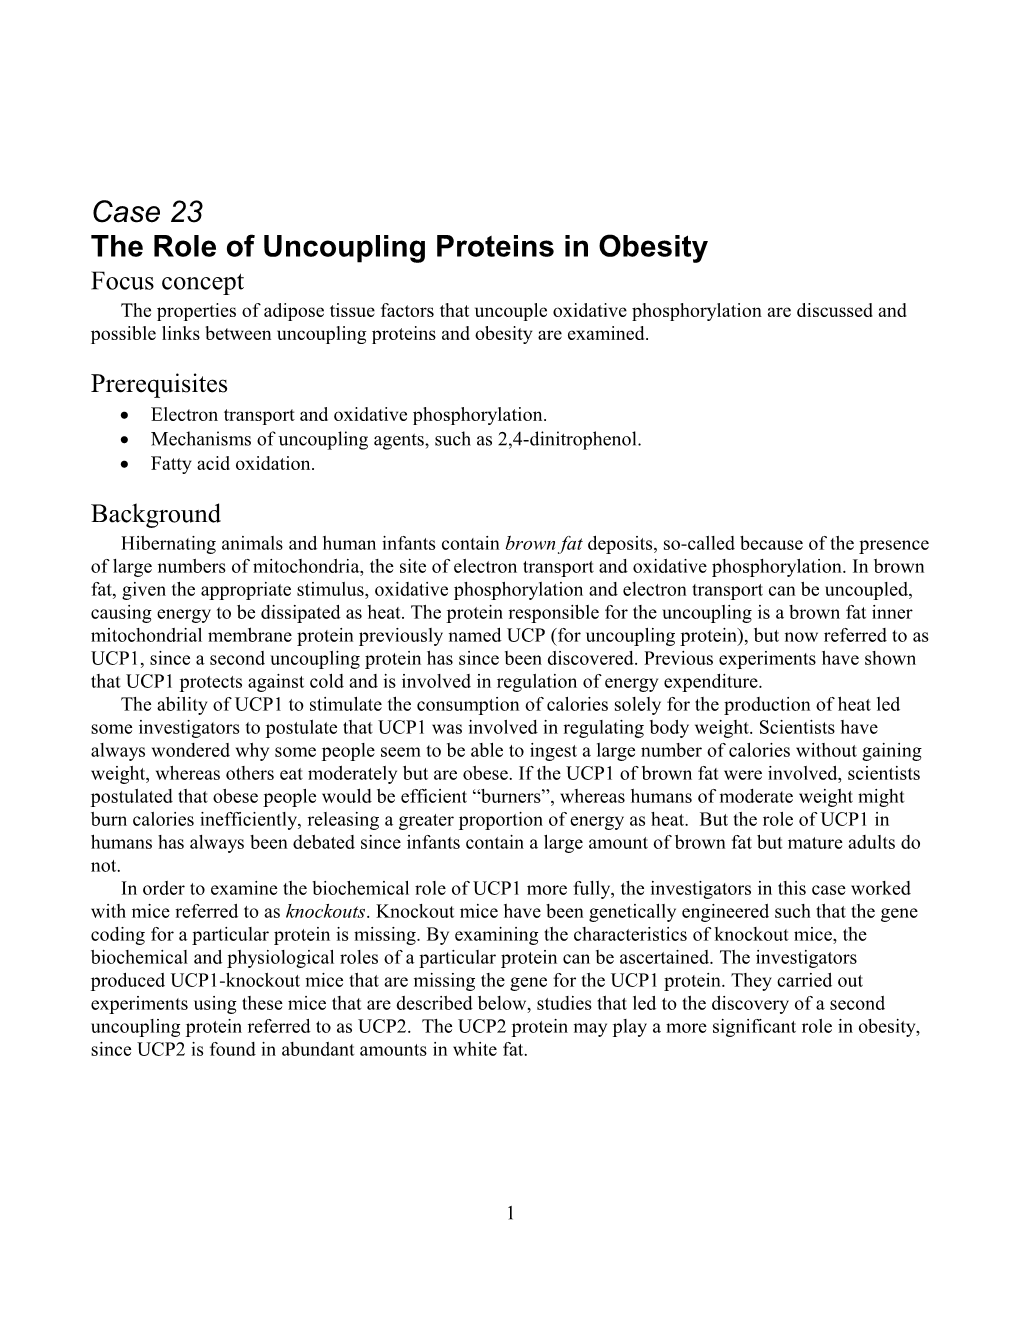 The Role of Uncoupling Proteins in Obesity